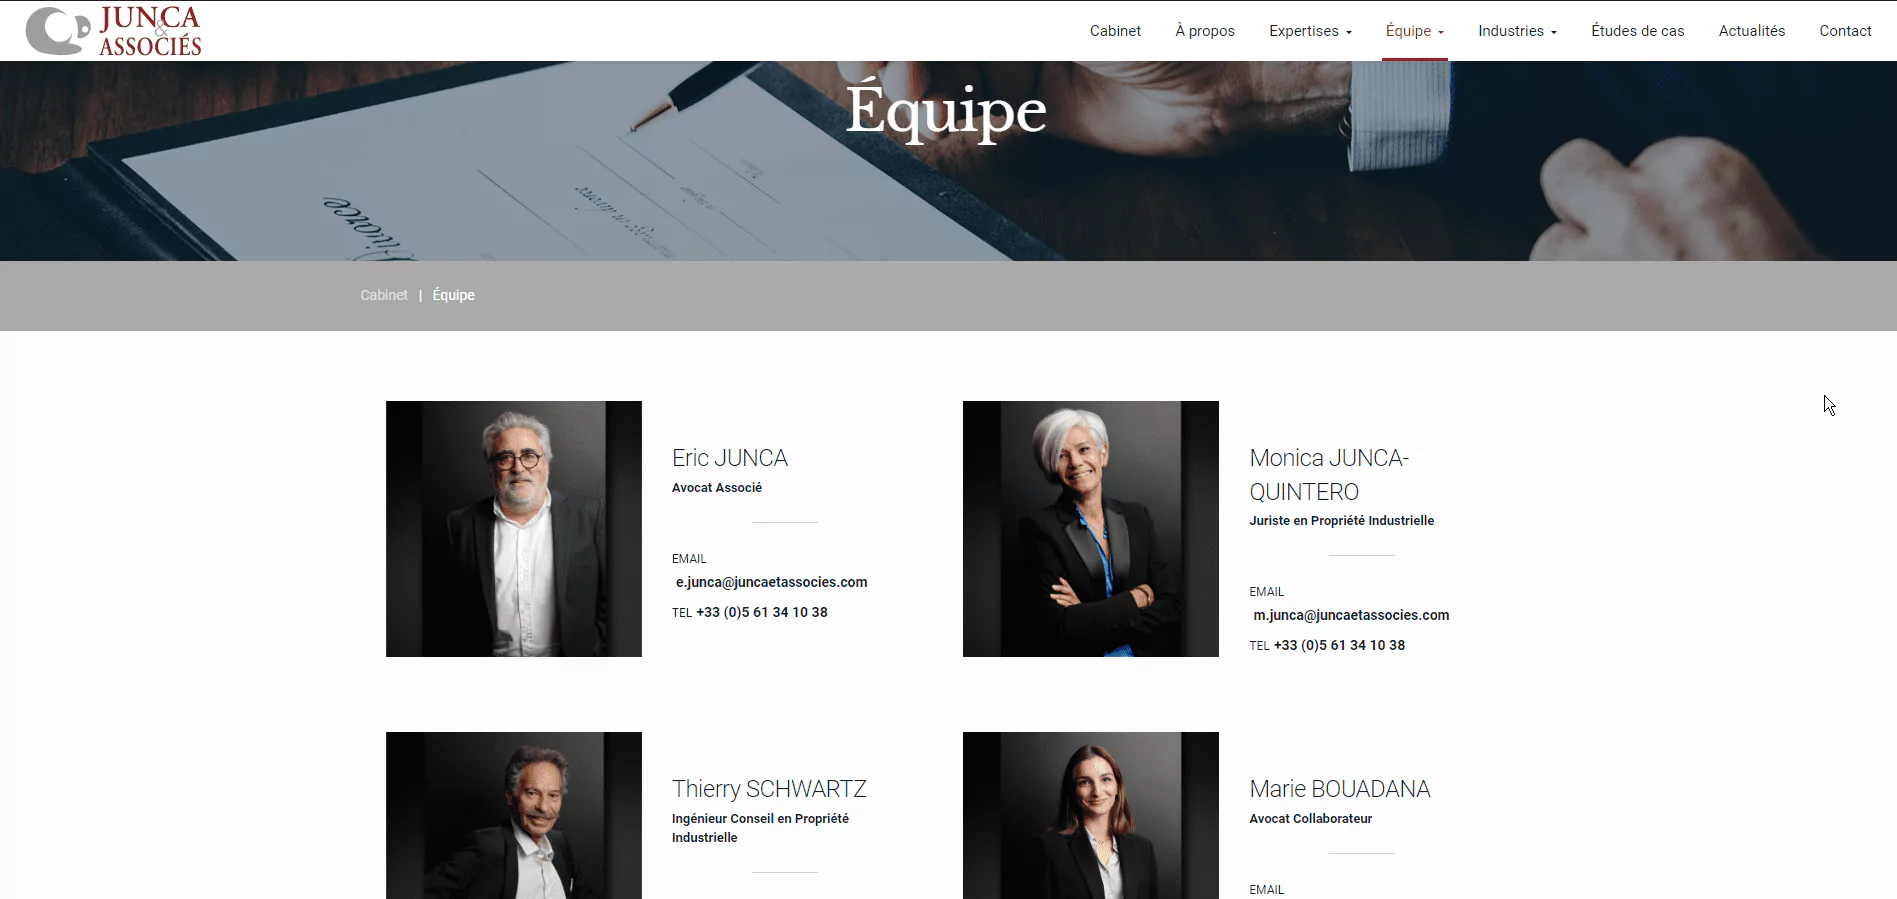 baccana-digital-consulting-client-project-junca-et-associes-toulouse-team-page